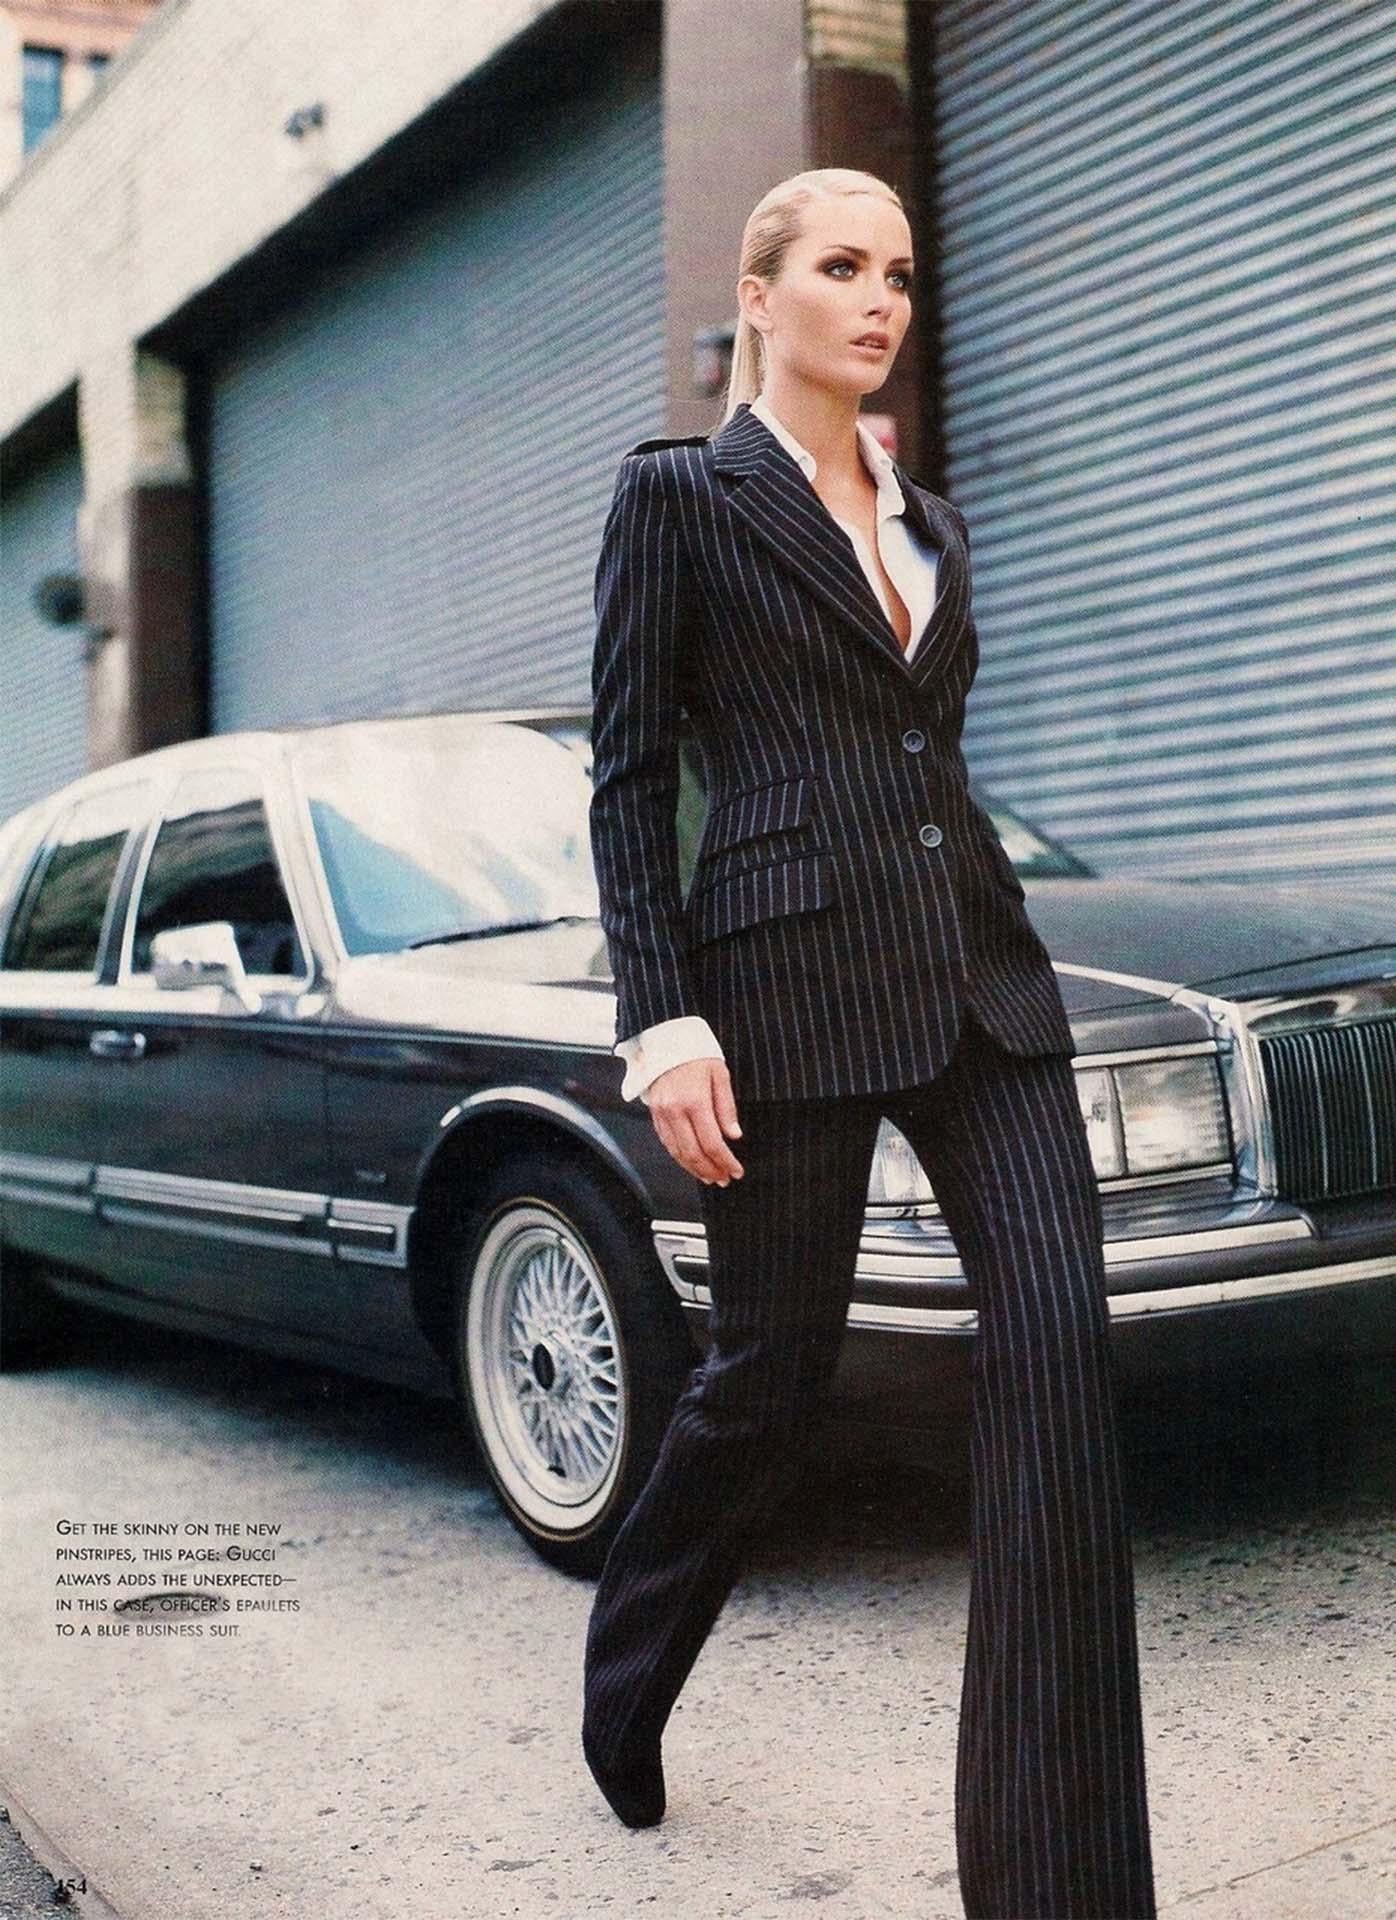 Presenting a fabulous black pinstripe Gucci suit designed by Tom Ford. From the Fall/Winter 1996 collection, this fabulous suit debuted on the season's runway as part of Look 16, modeled by Kylie Bax. Georgina Grenville also wore this set in the